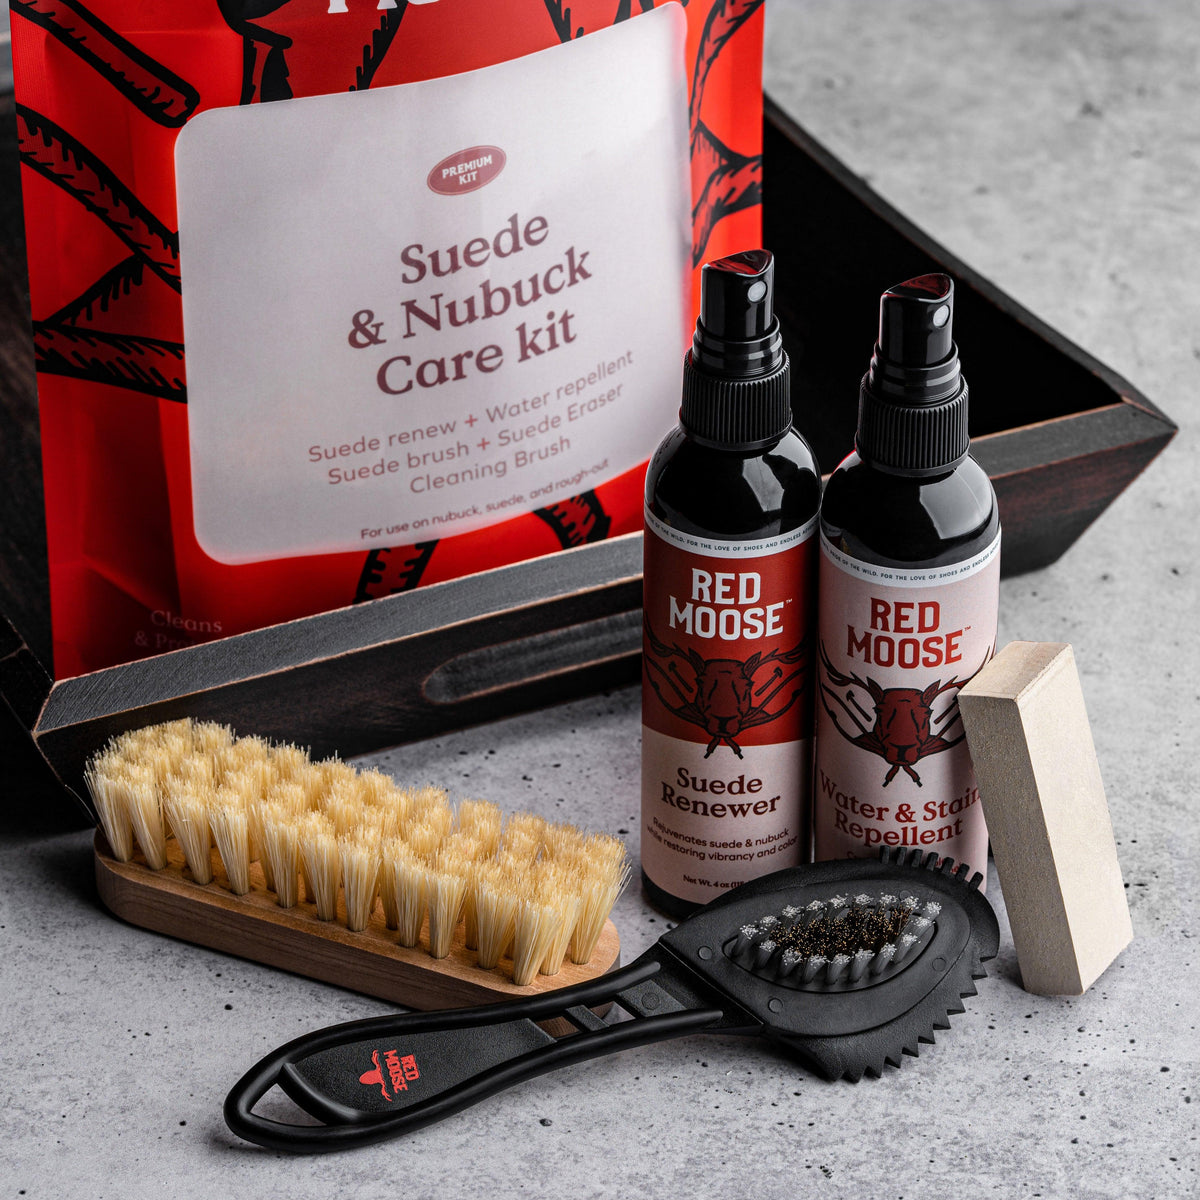 Shoe Care Cleaner Kit